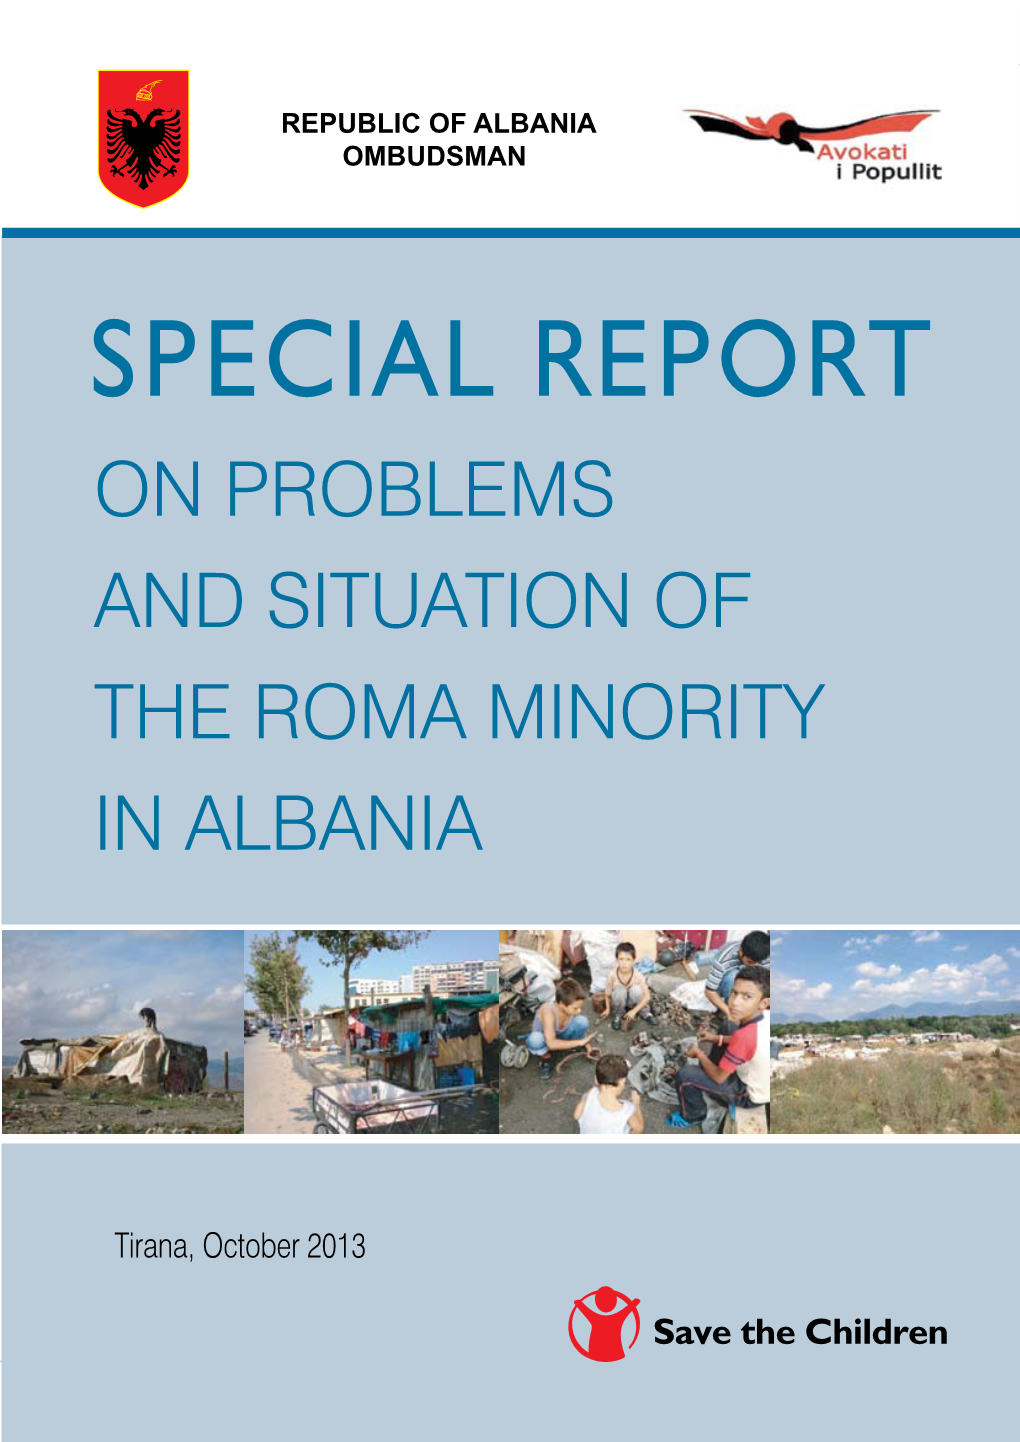 Special Report on Problems and Situation of the Roma Minority in Albania